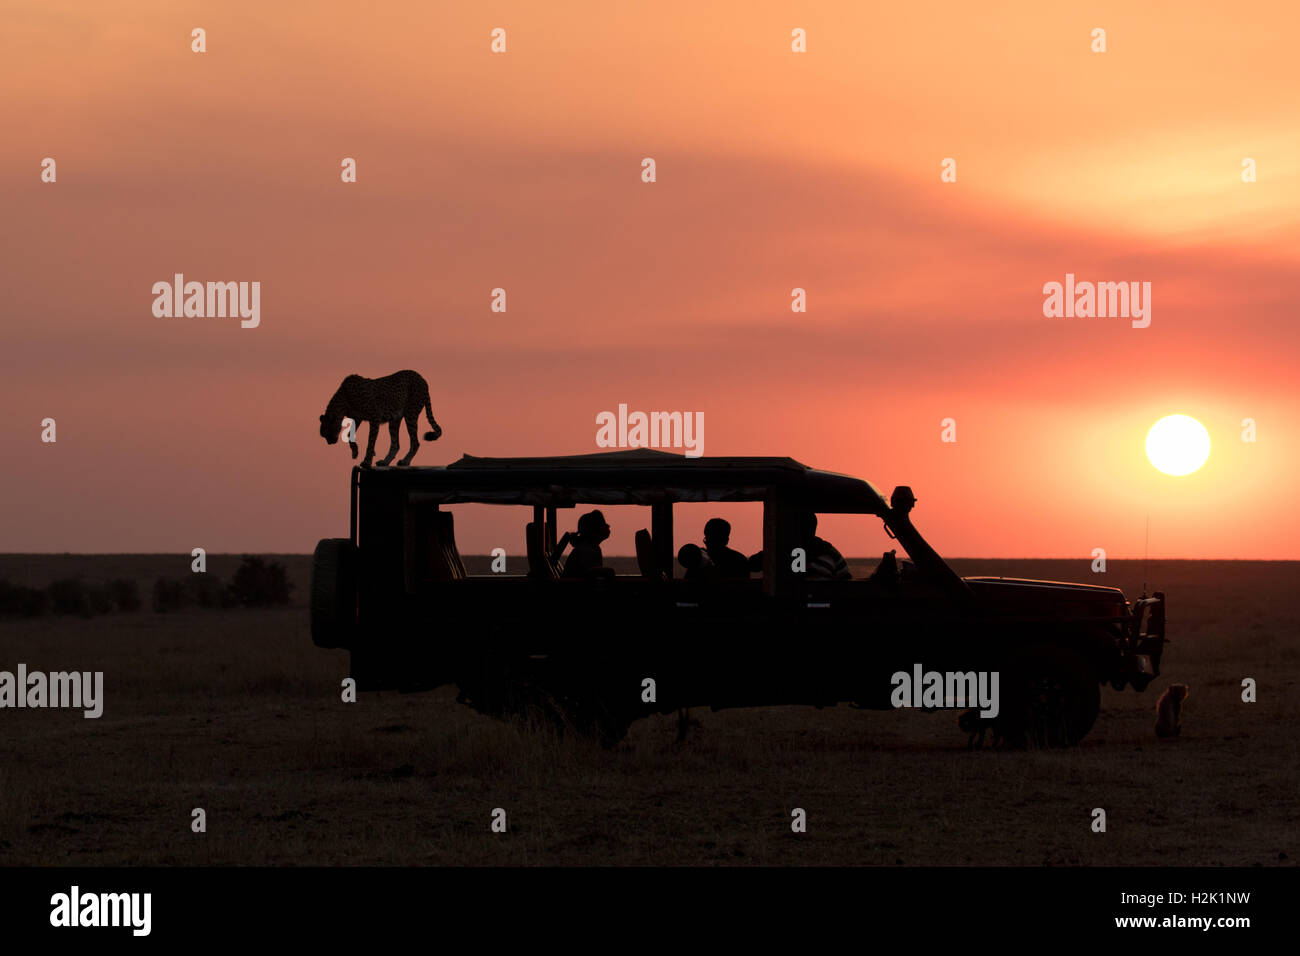 A silhouette of a cheetah walking atop a safari vehicle as the sun sets in the background Stock Photo